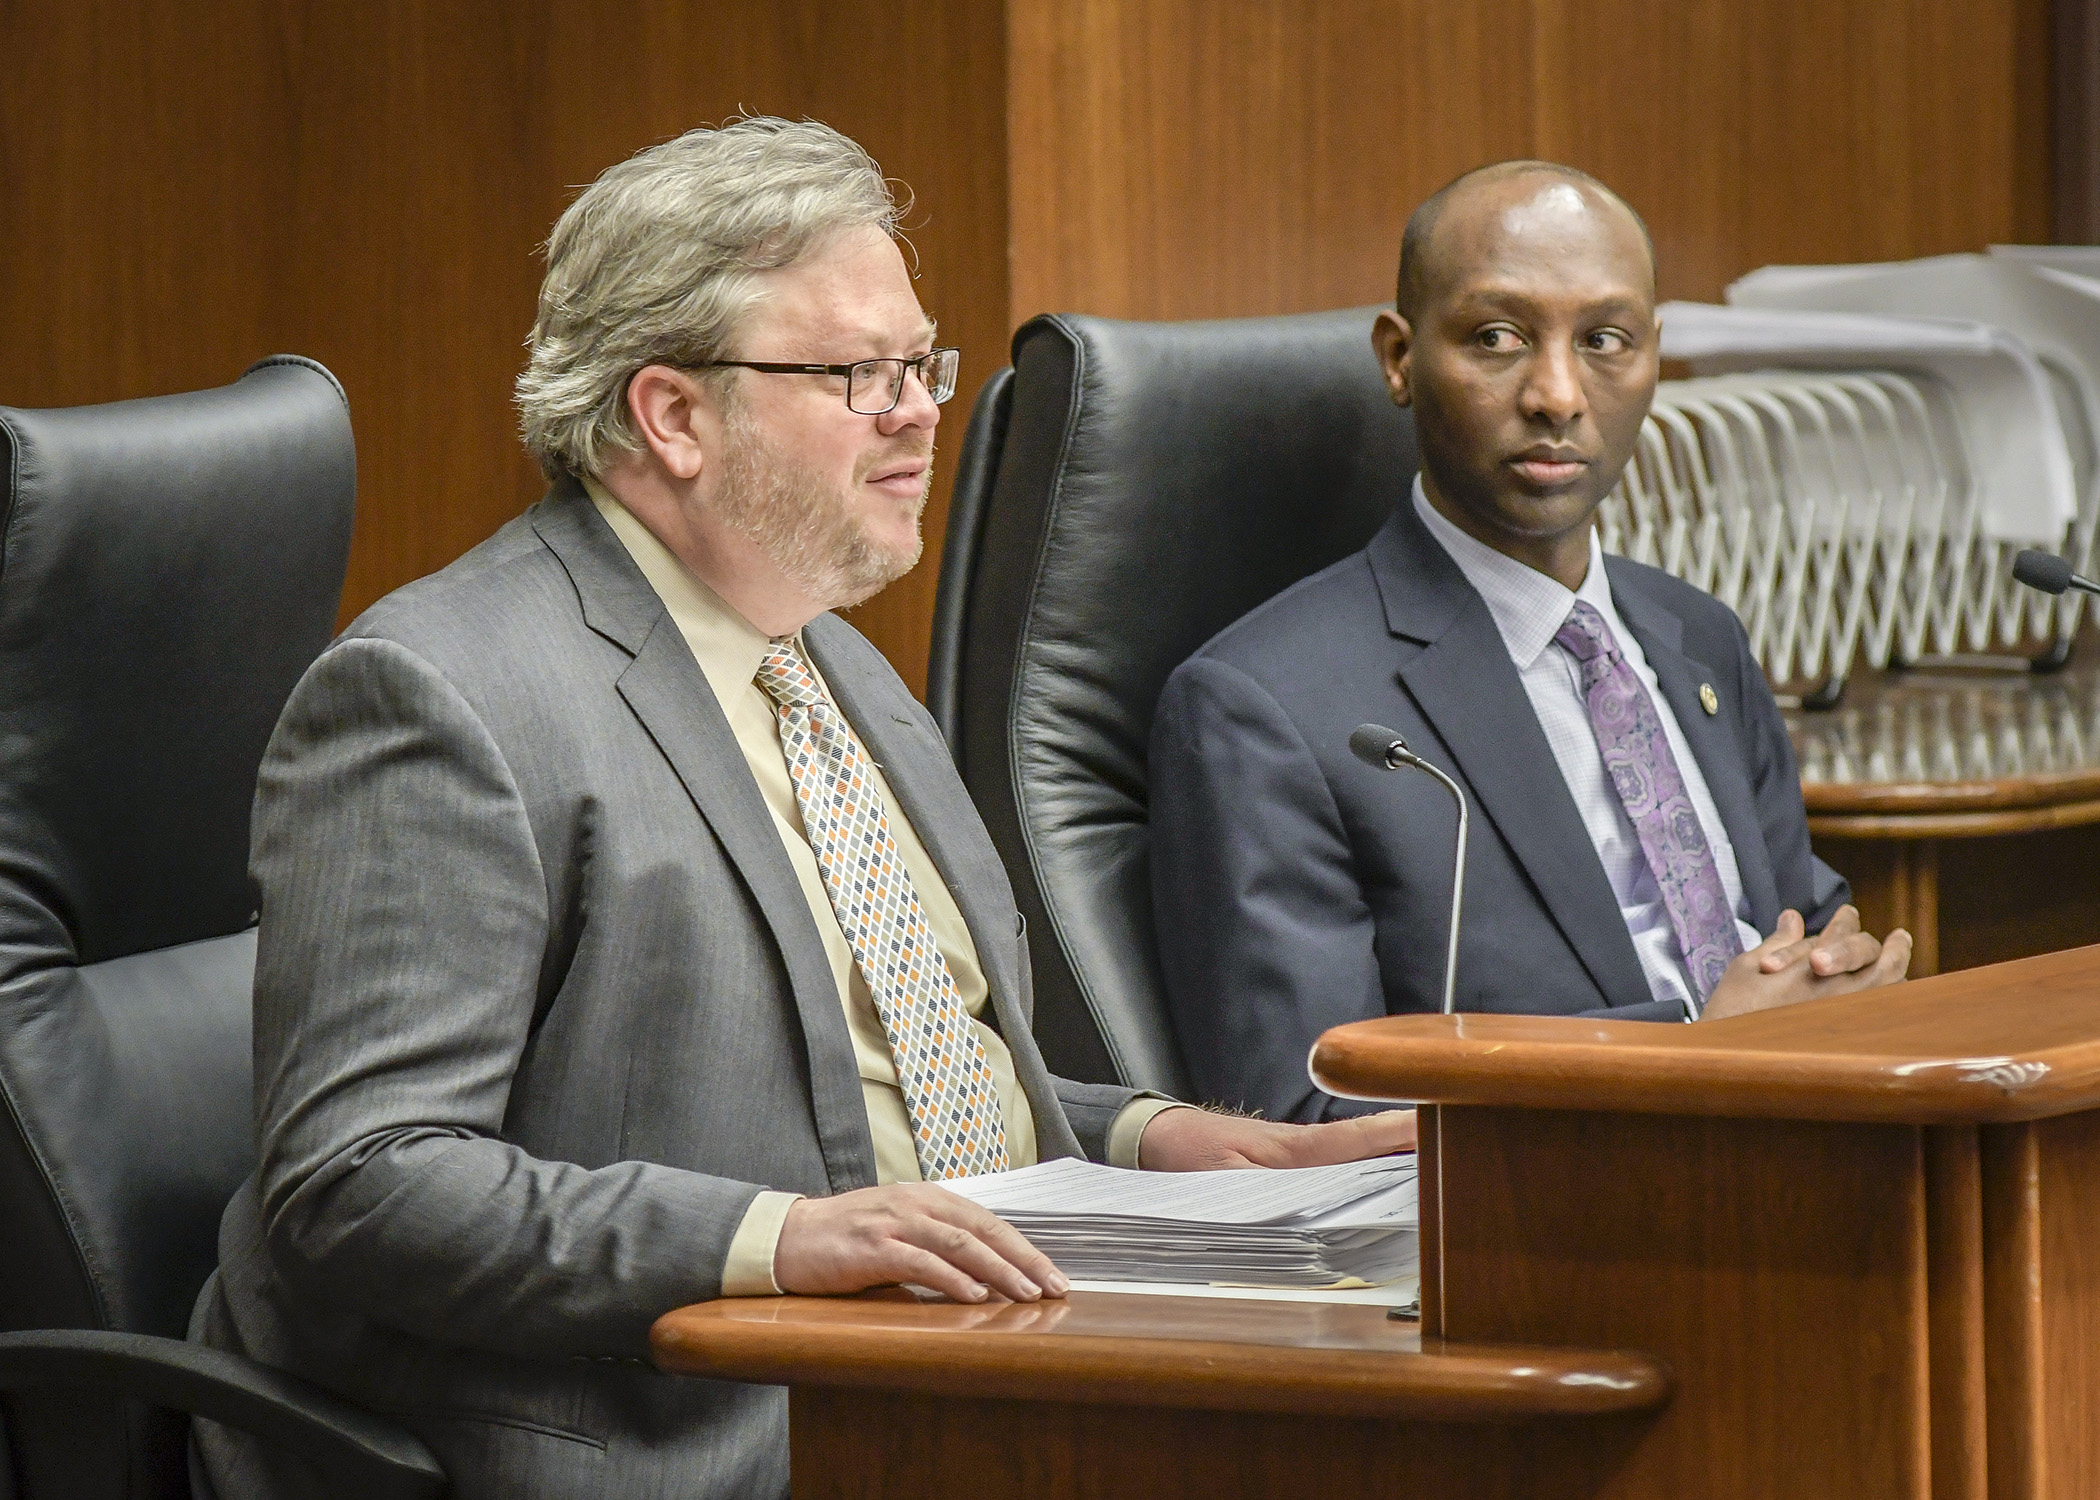 David Anderson with All Parks Alliance for Change, left, testifies before the House Jobs and Economic Development Finance Division Jan. 31 on a bill sponsored by Rep. Mohamud Noor, right. Photo by Andrew VonBank